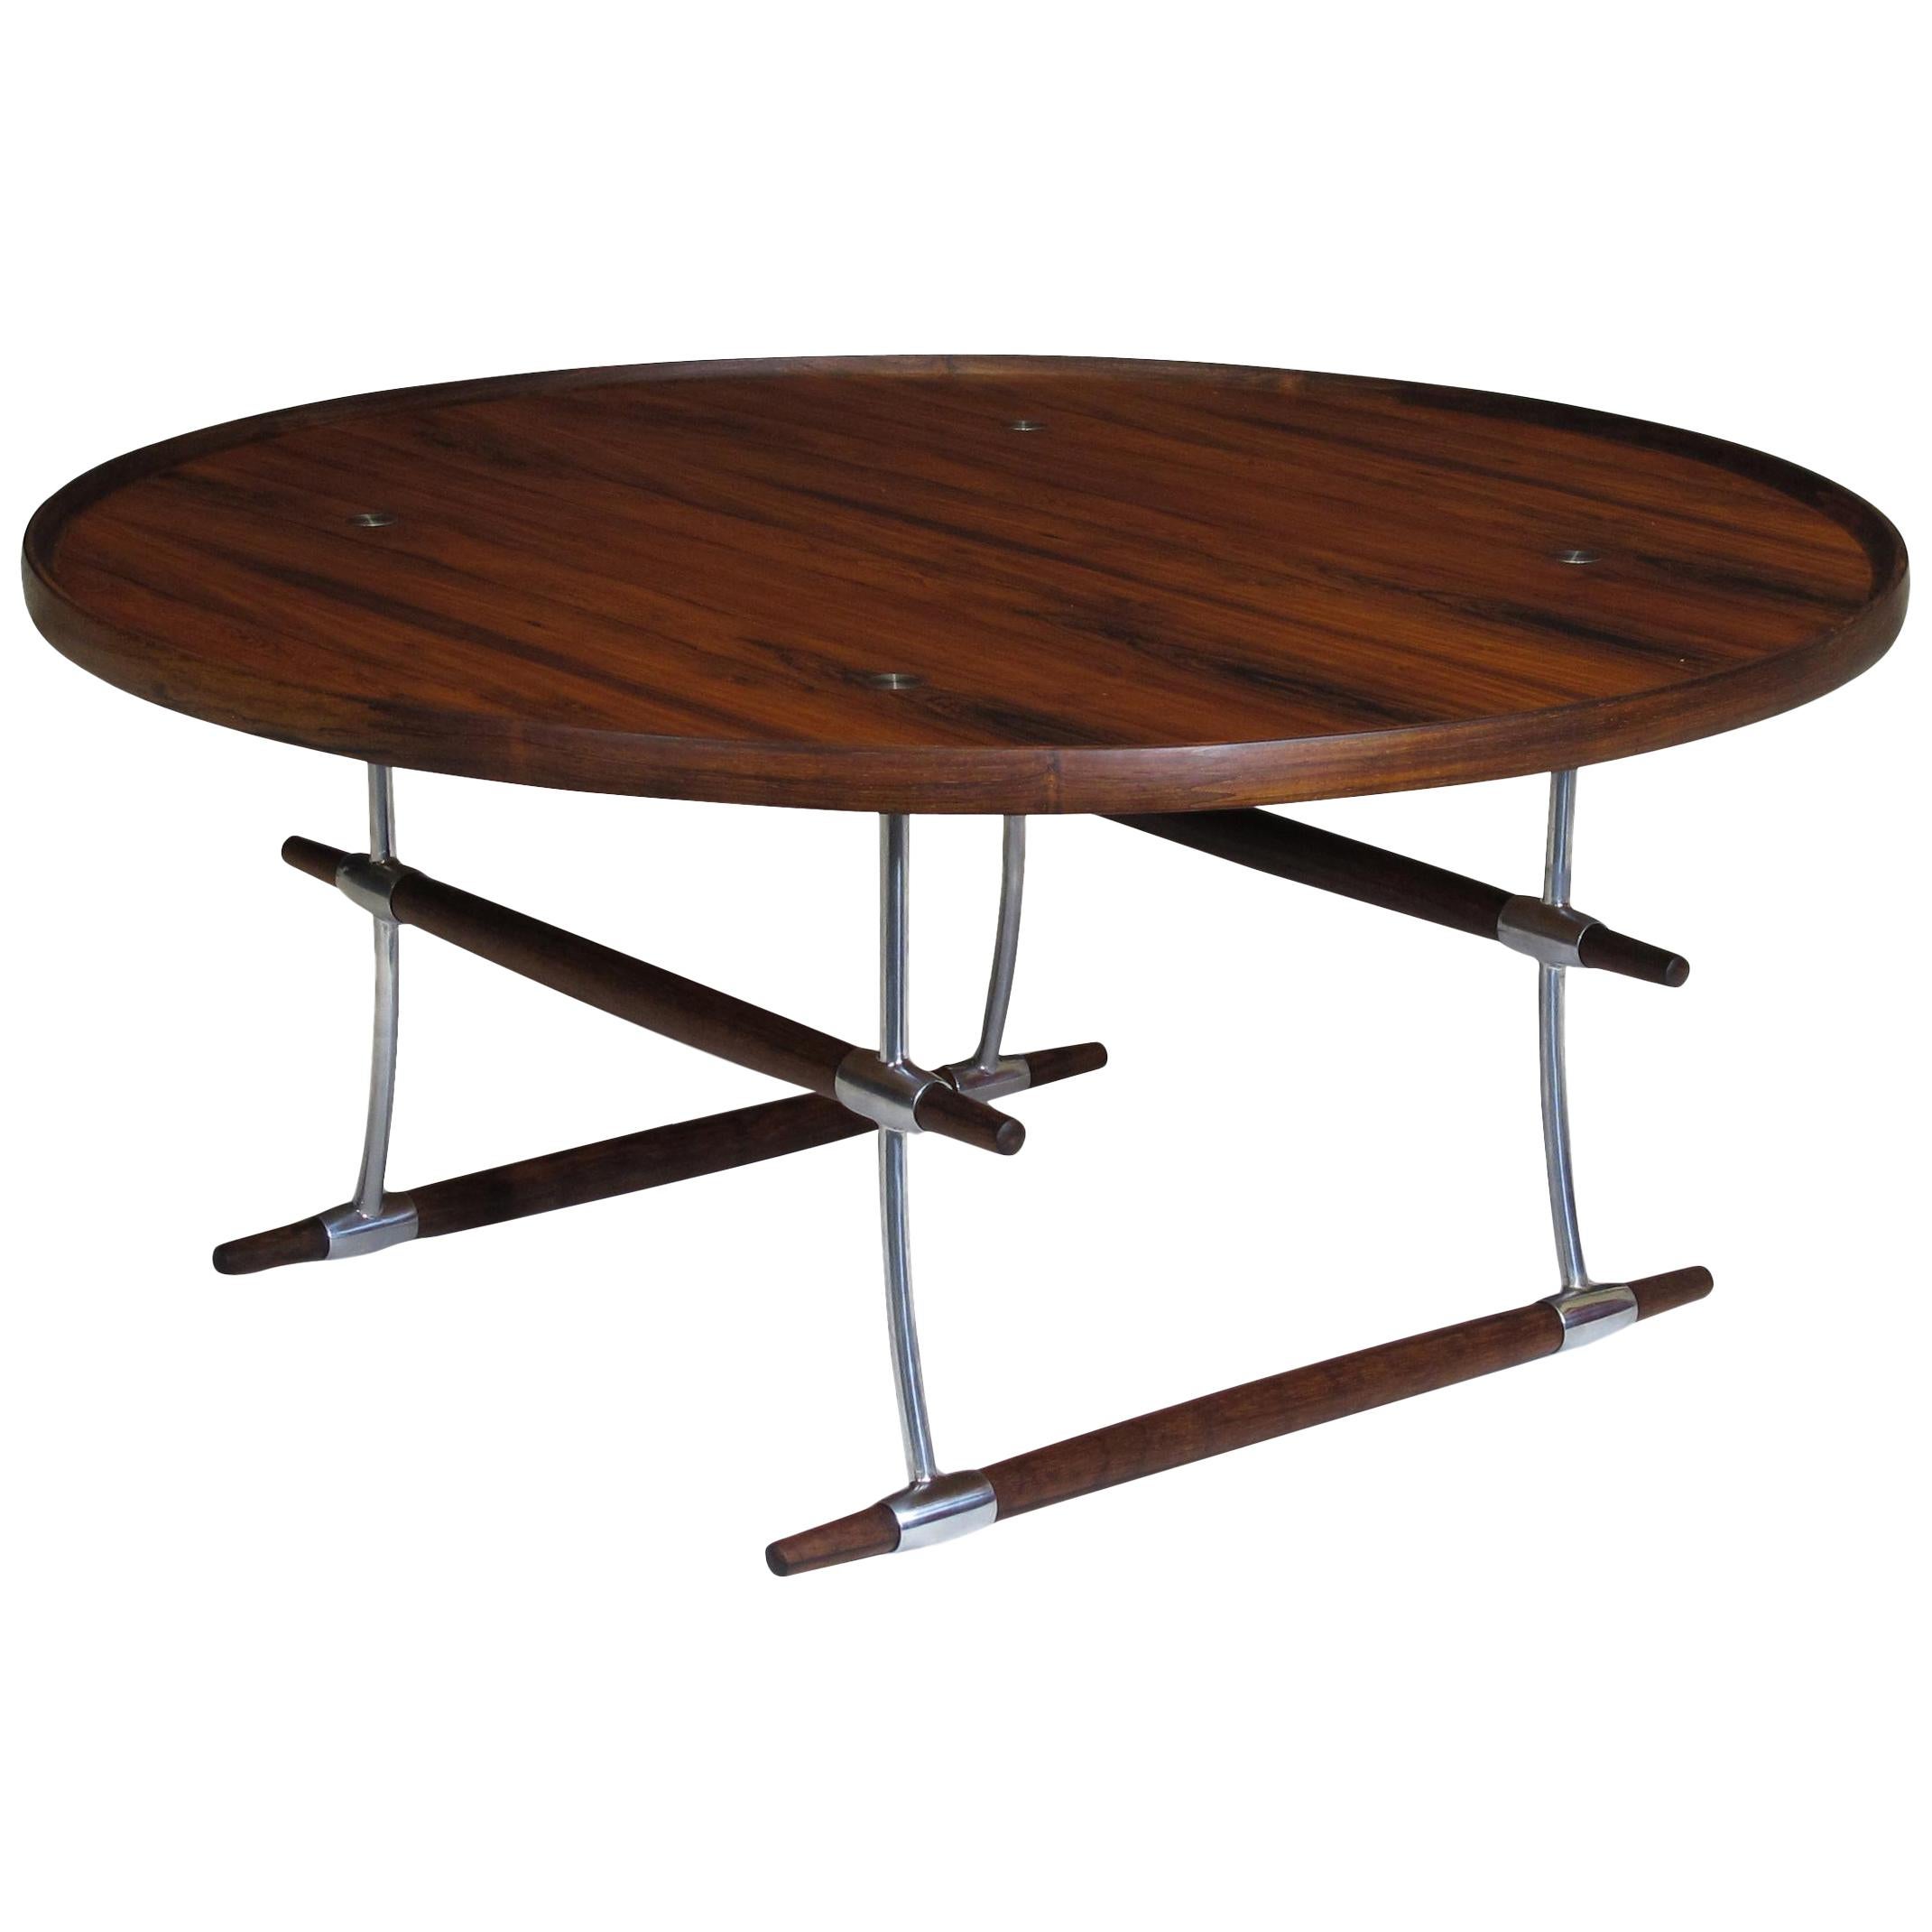 Jens Quistgaard for Nissen Langa Circular Rosewood and Chrome Coffee Table